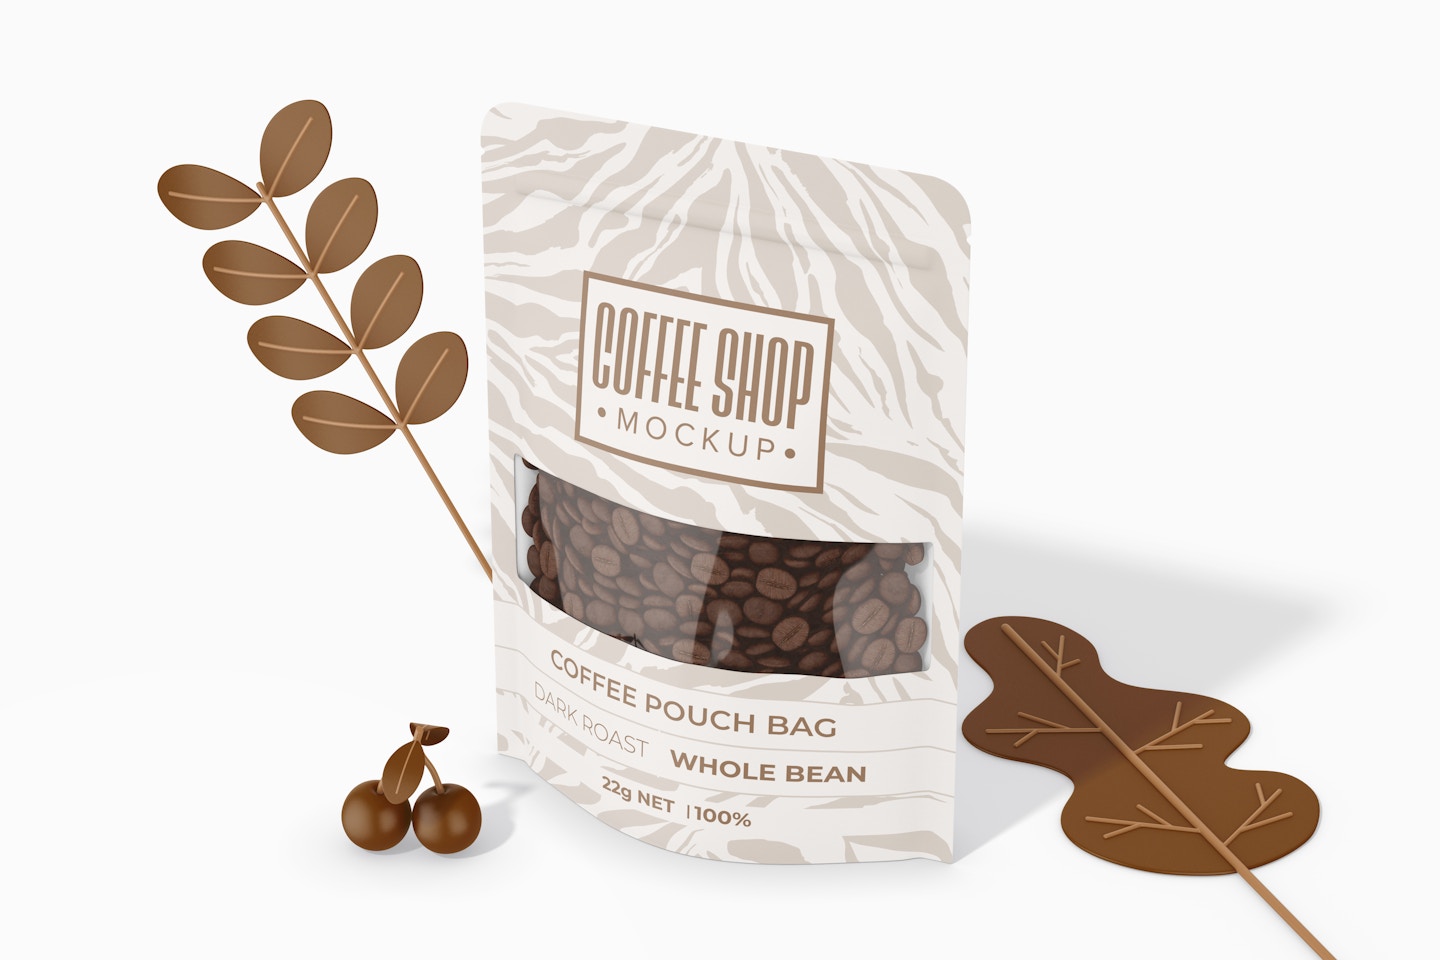 Coffee Pouch Bag Mockup, Perspective